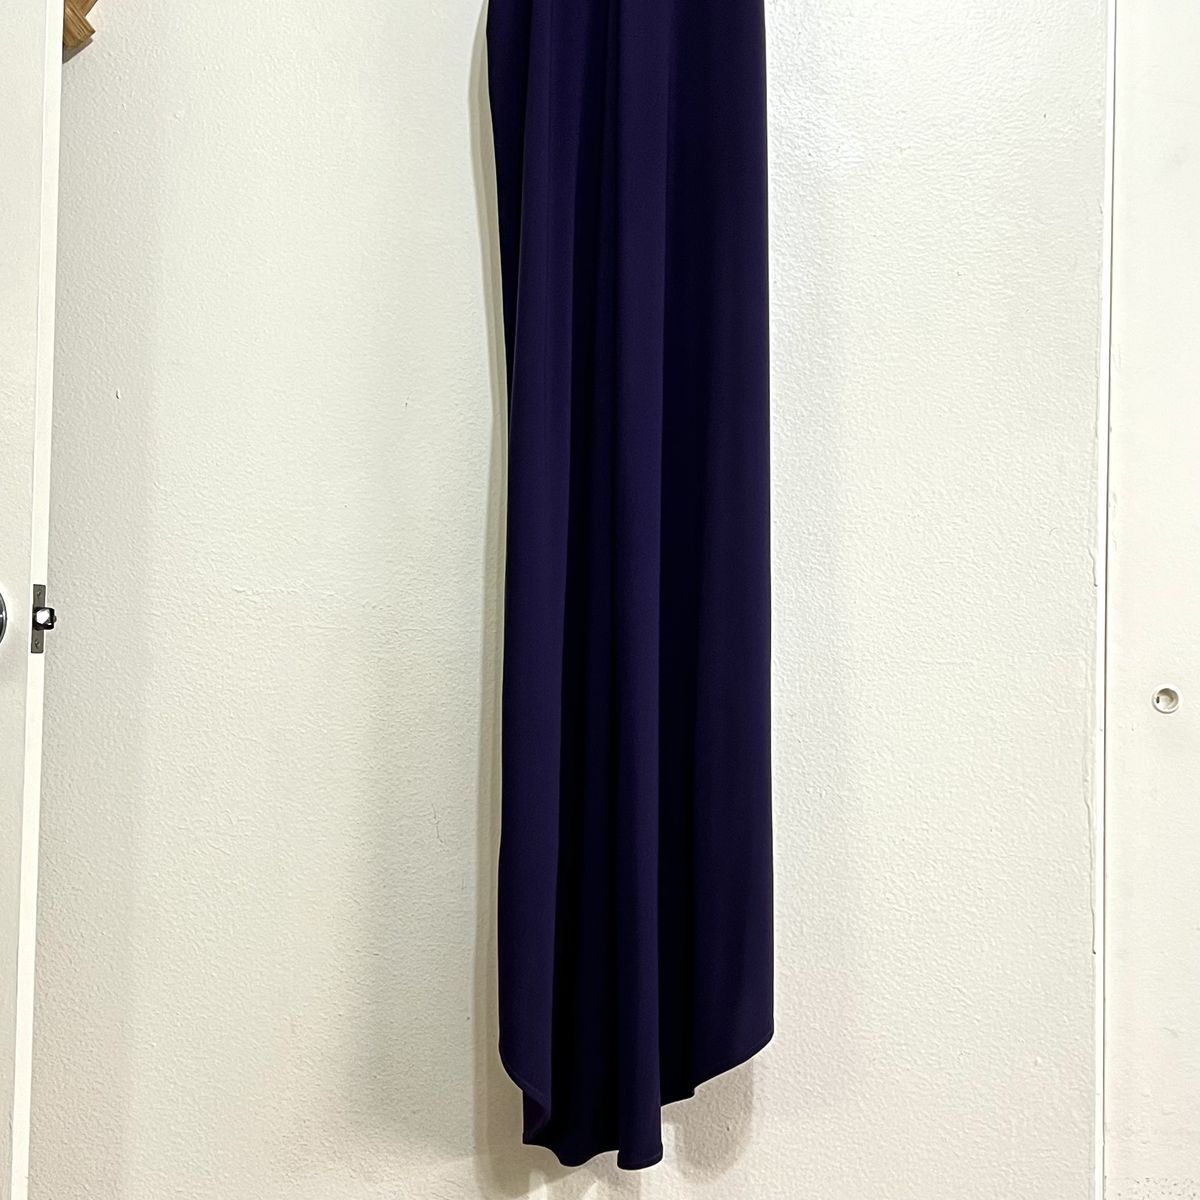 Style 28204 La Femme Size 2 Prom Strapless Purple Floor Length Maxi on Queenly